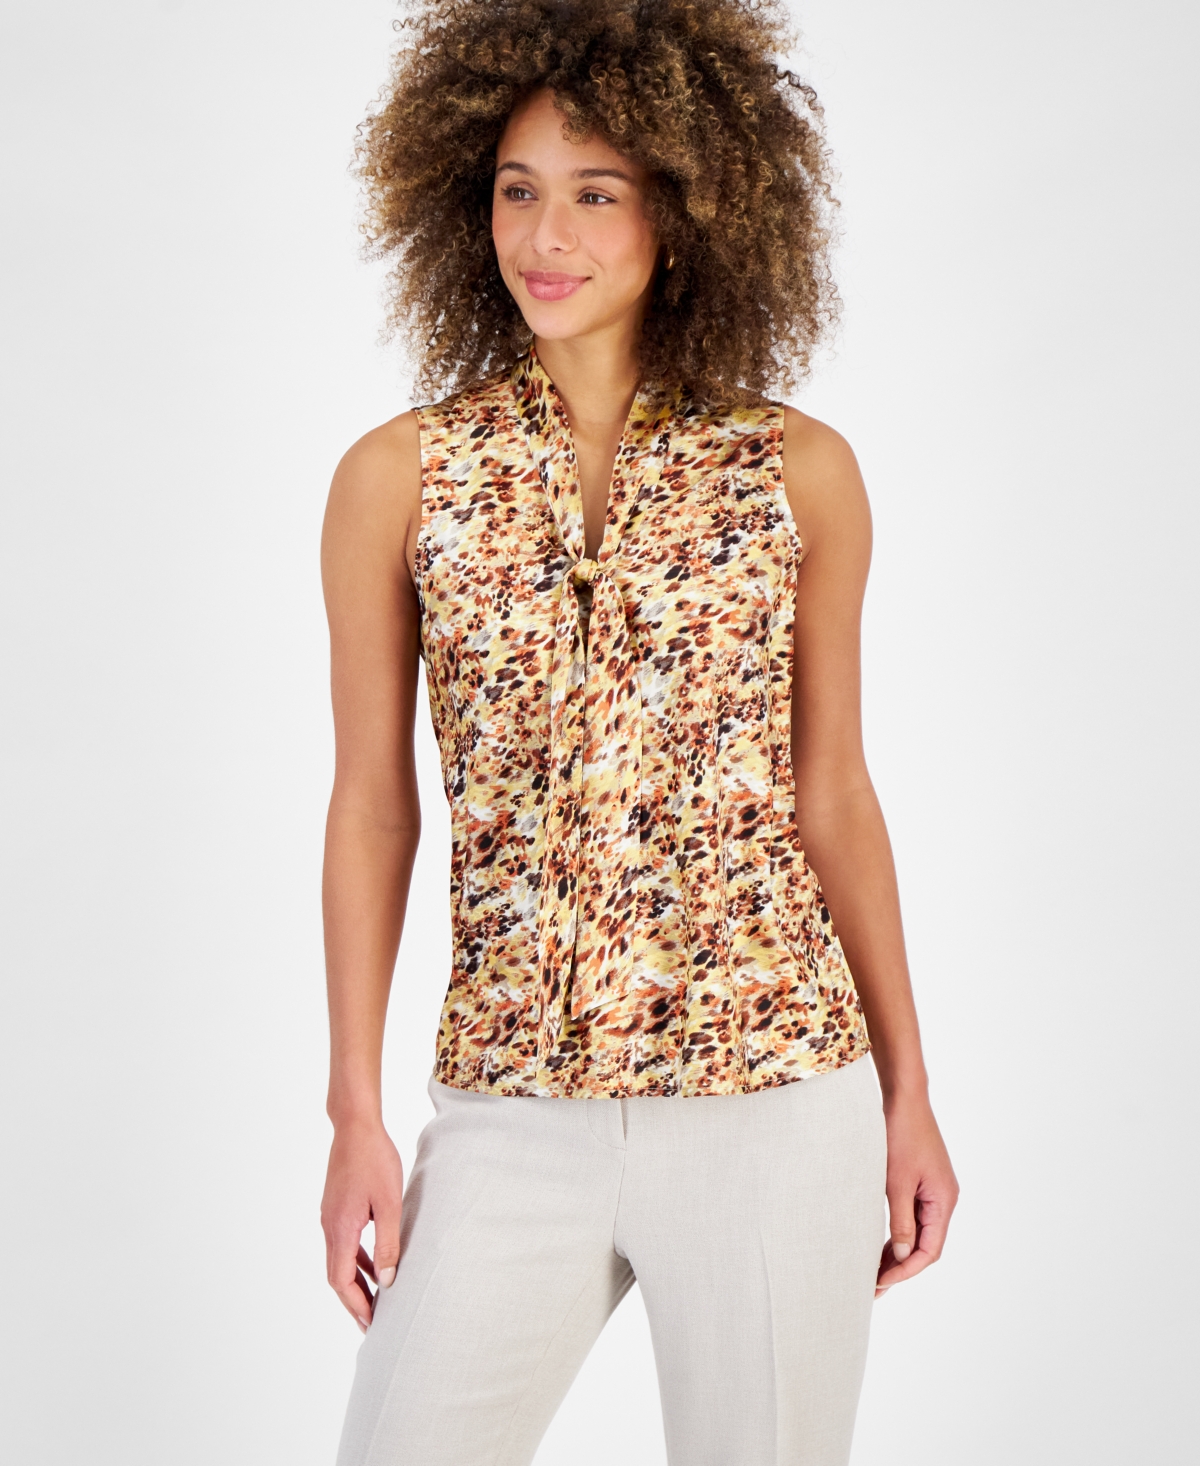 Women's Printed Tie-Front Blouse - Daffodil/Vanilla Ice Mlt